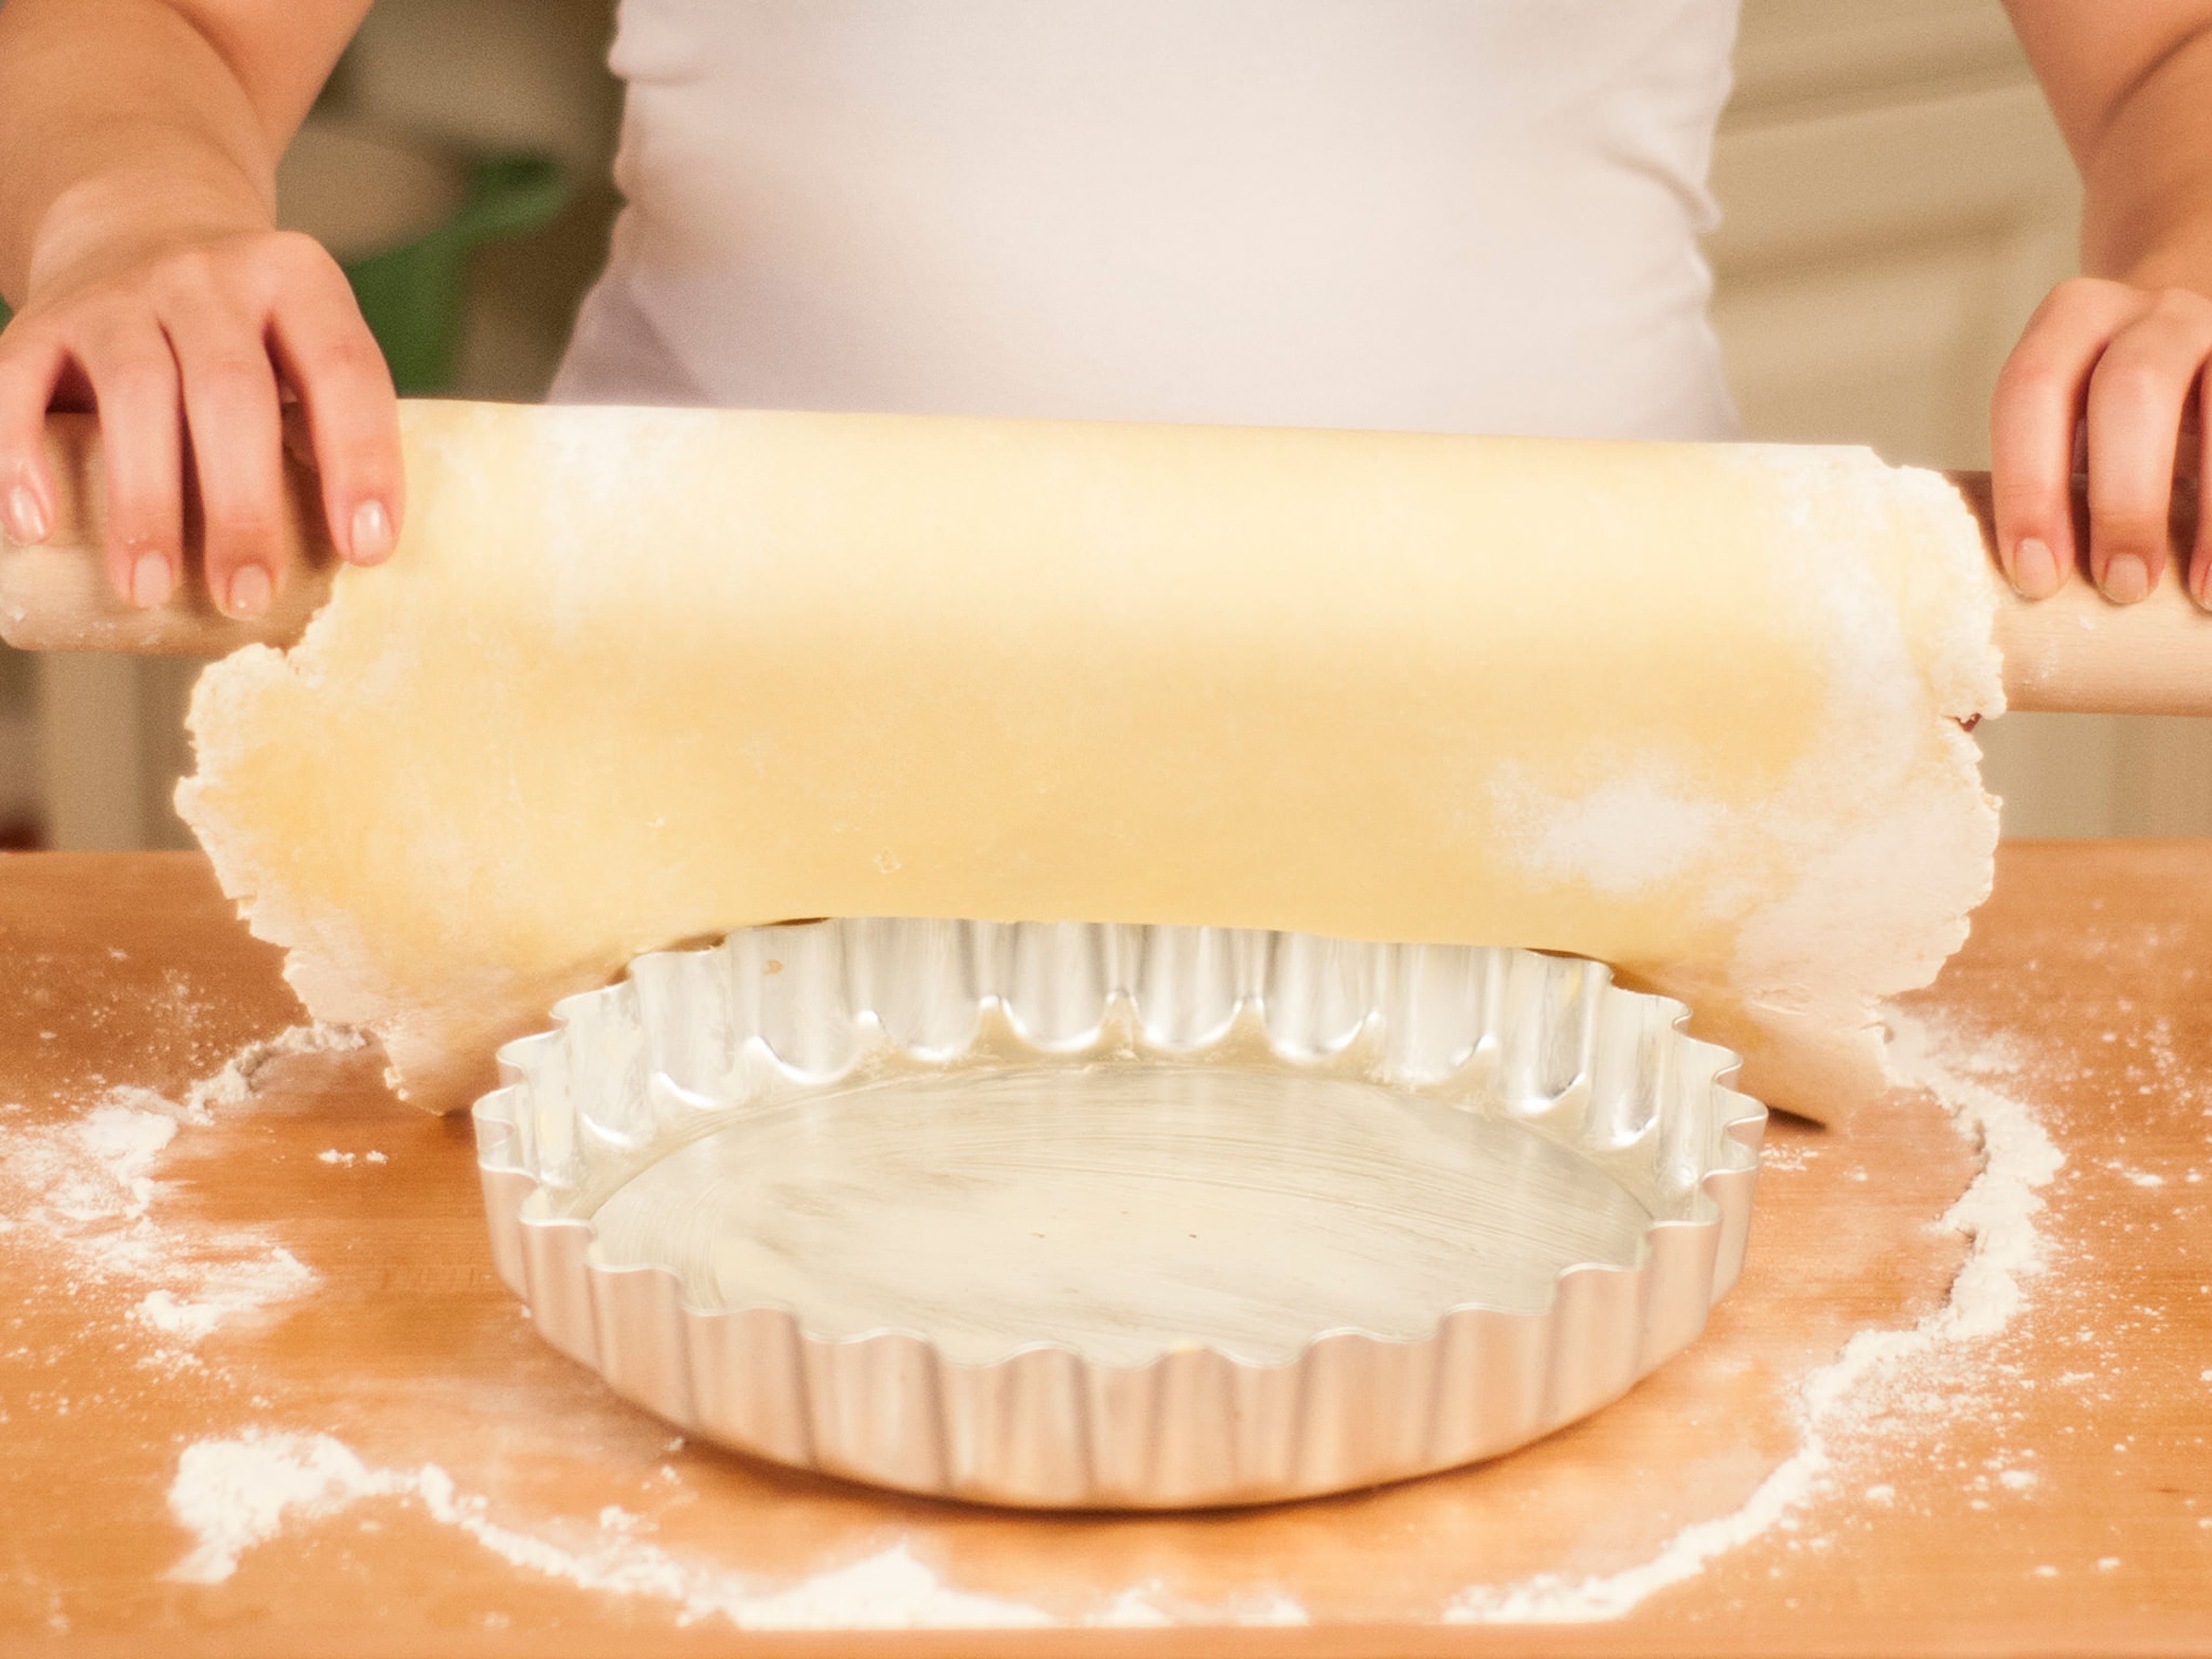 Lay the dough into the tart dish, leaving an edge. Press the sides firmly into the dish.